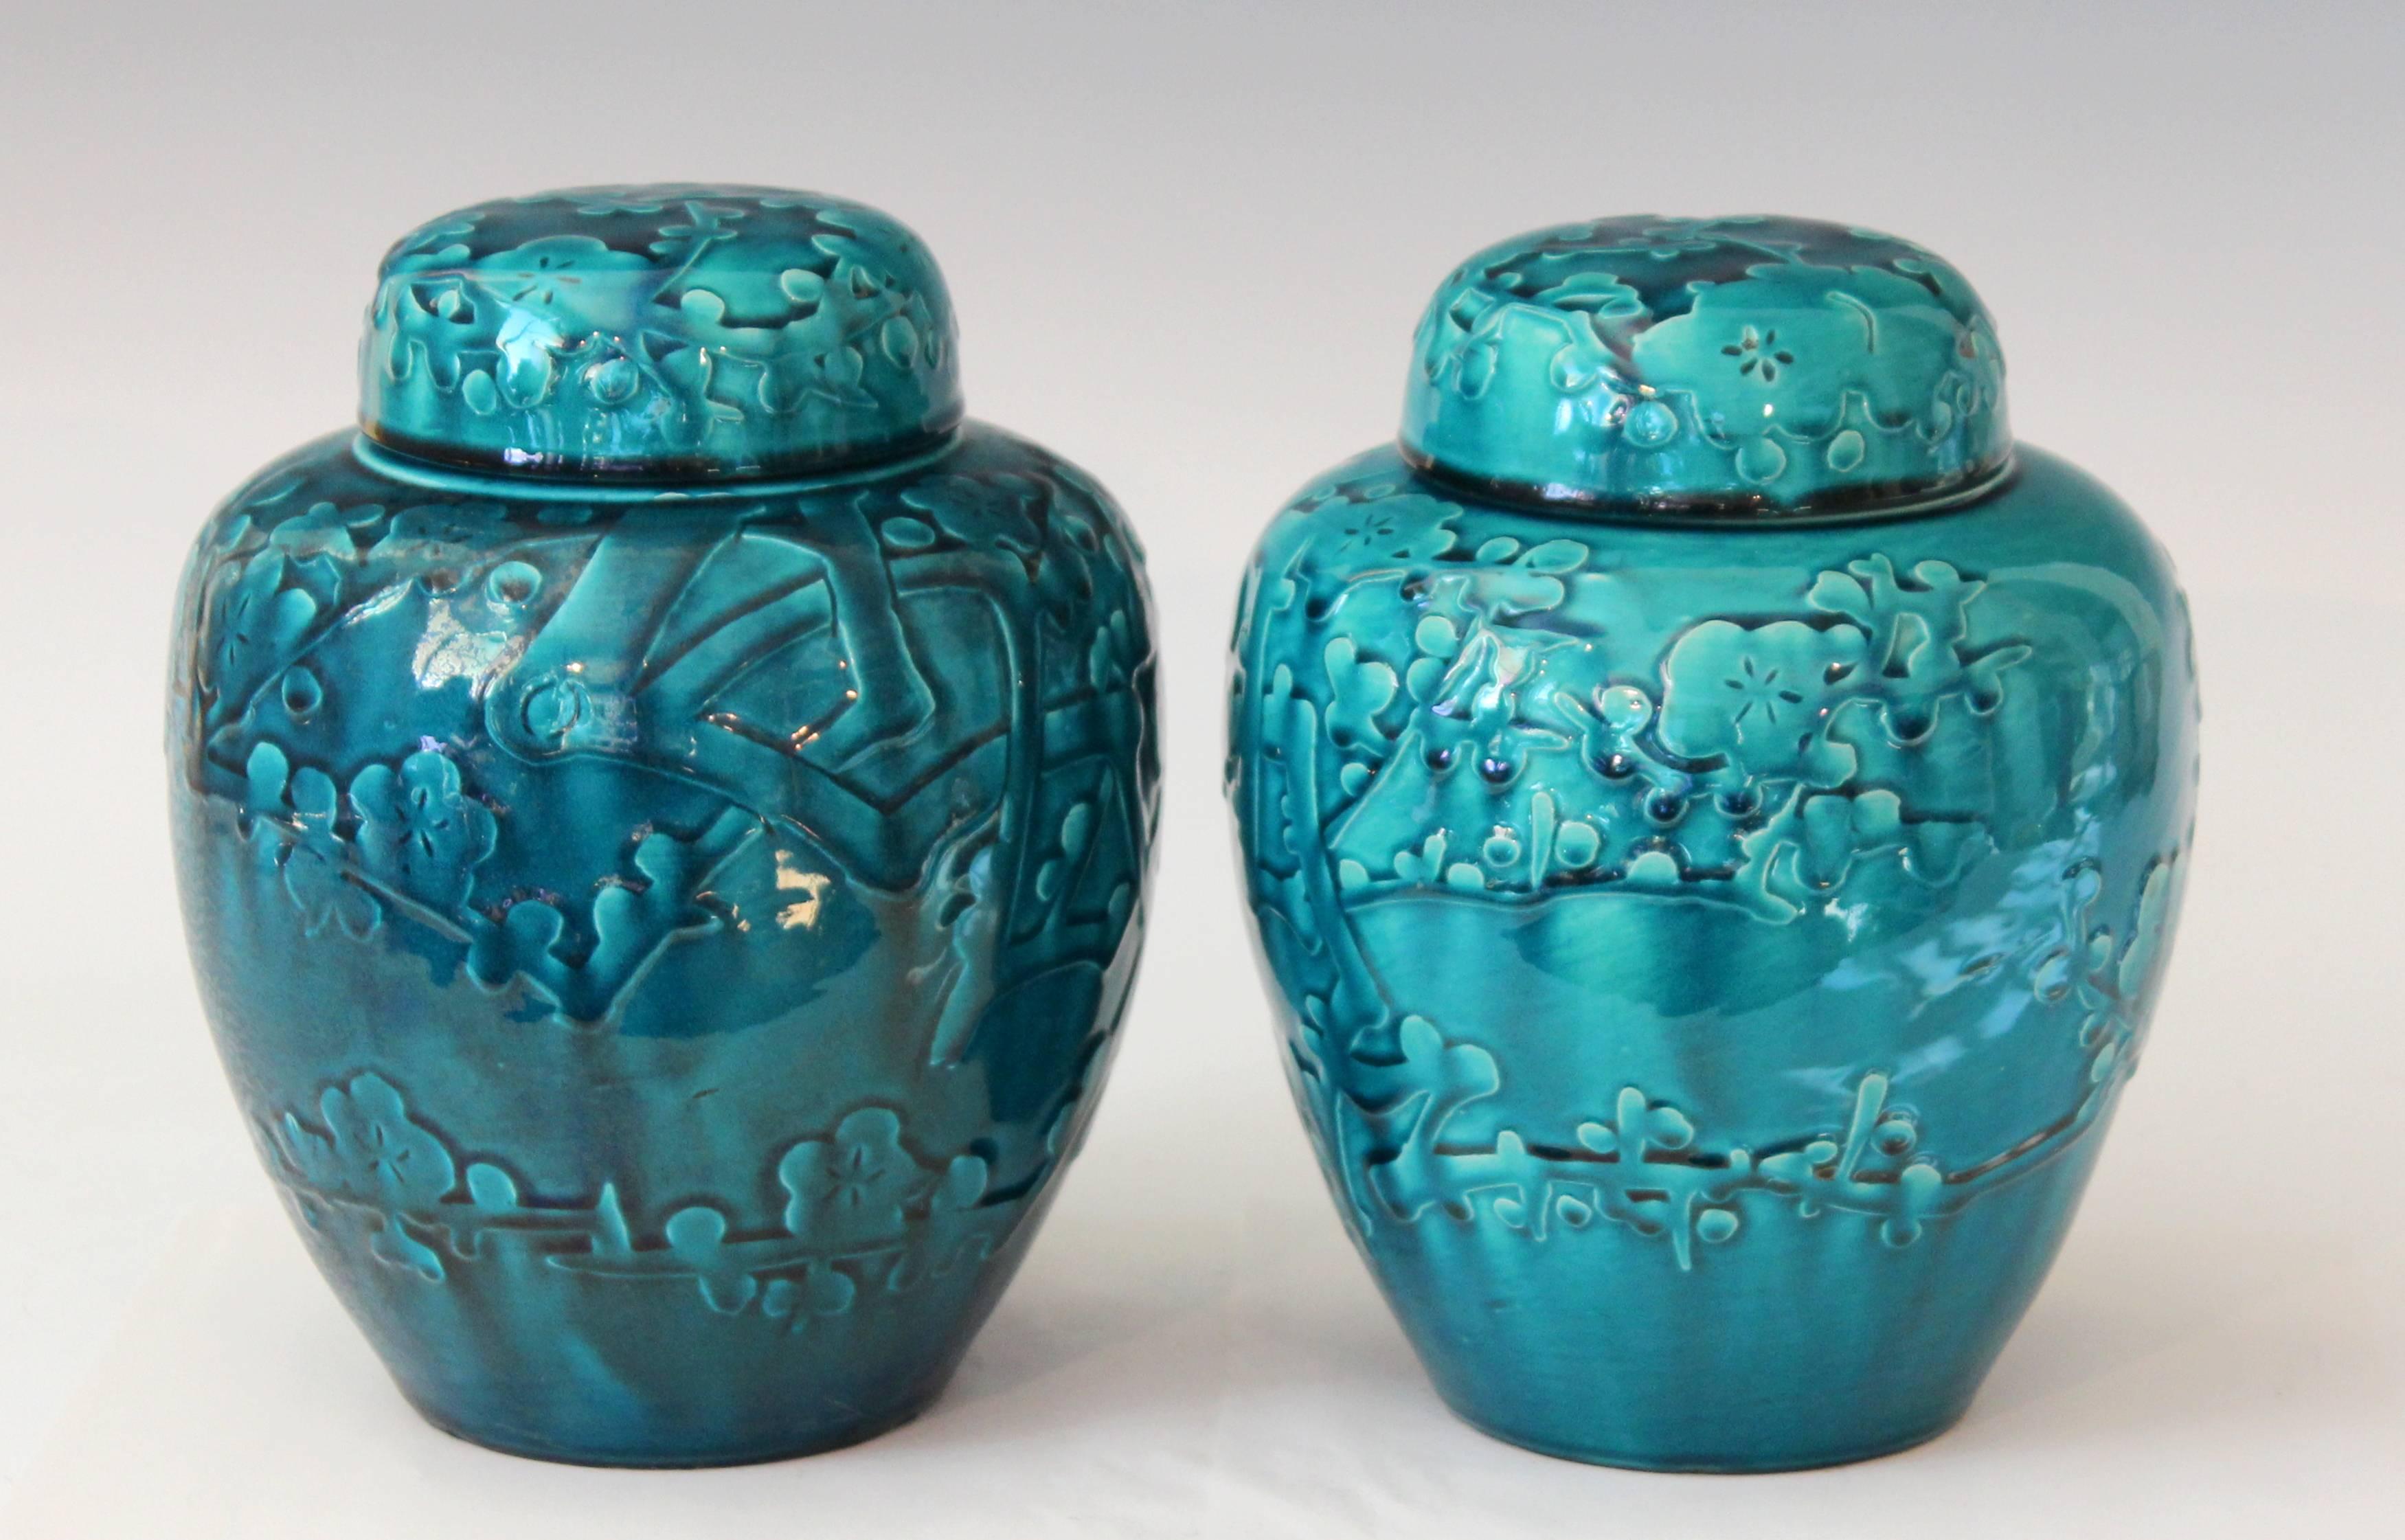 Pair of Awaji ginger jars and covers decorated with applied and incised prunus blossoms highlighted with a deep turquoise monochrome glaze, circa 1930. Impressed export, kiln, and potter's marks. Measures: 9" high, 7" diameter. Excellent